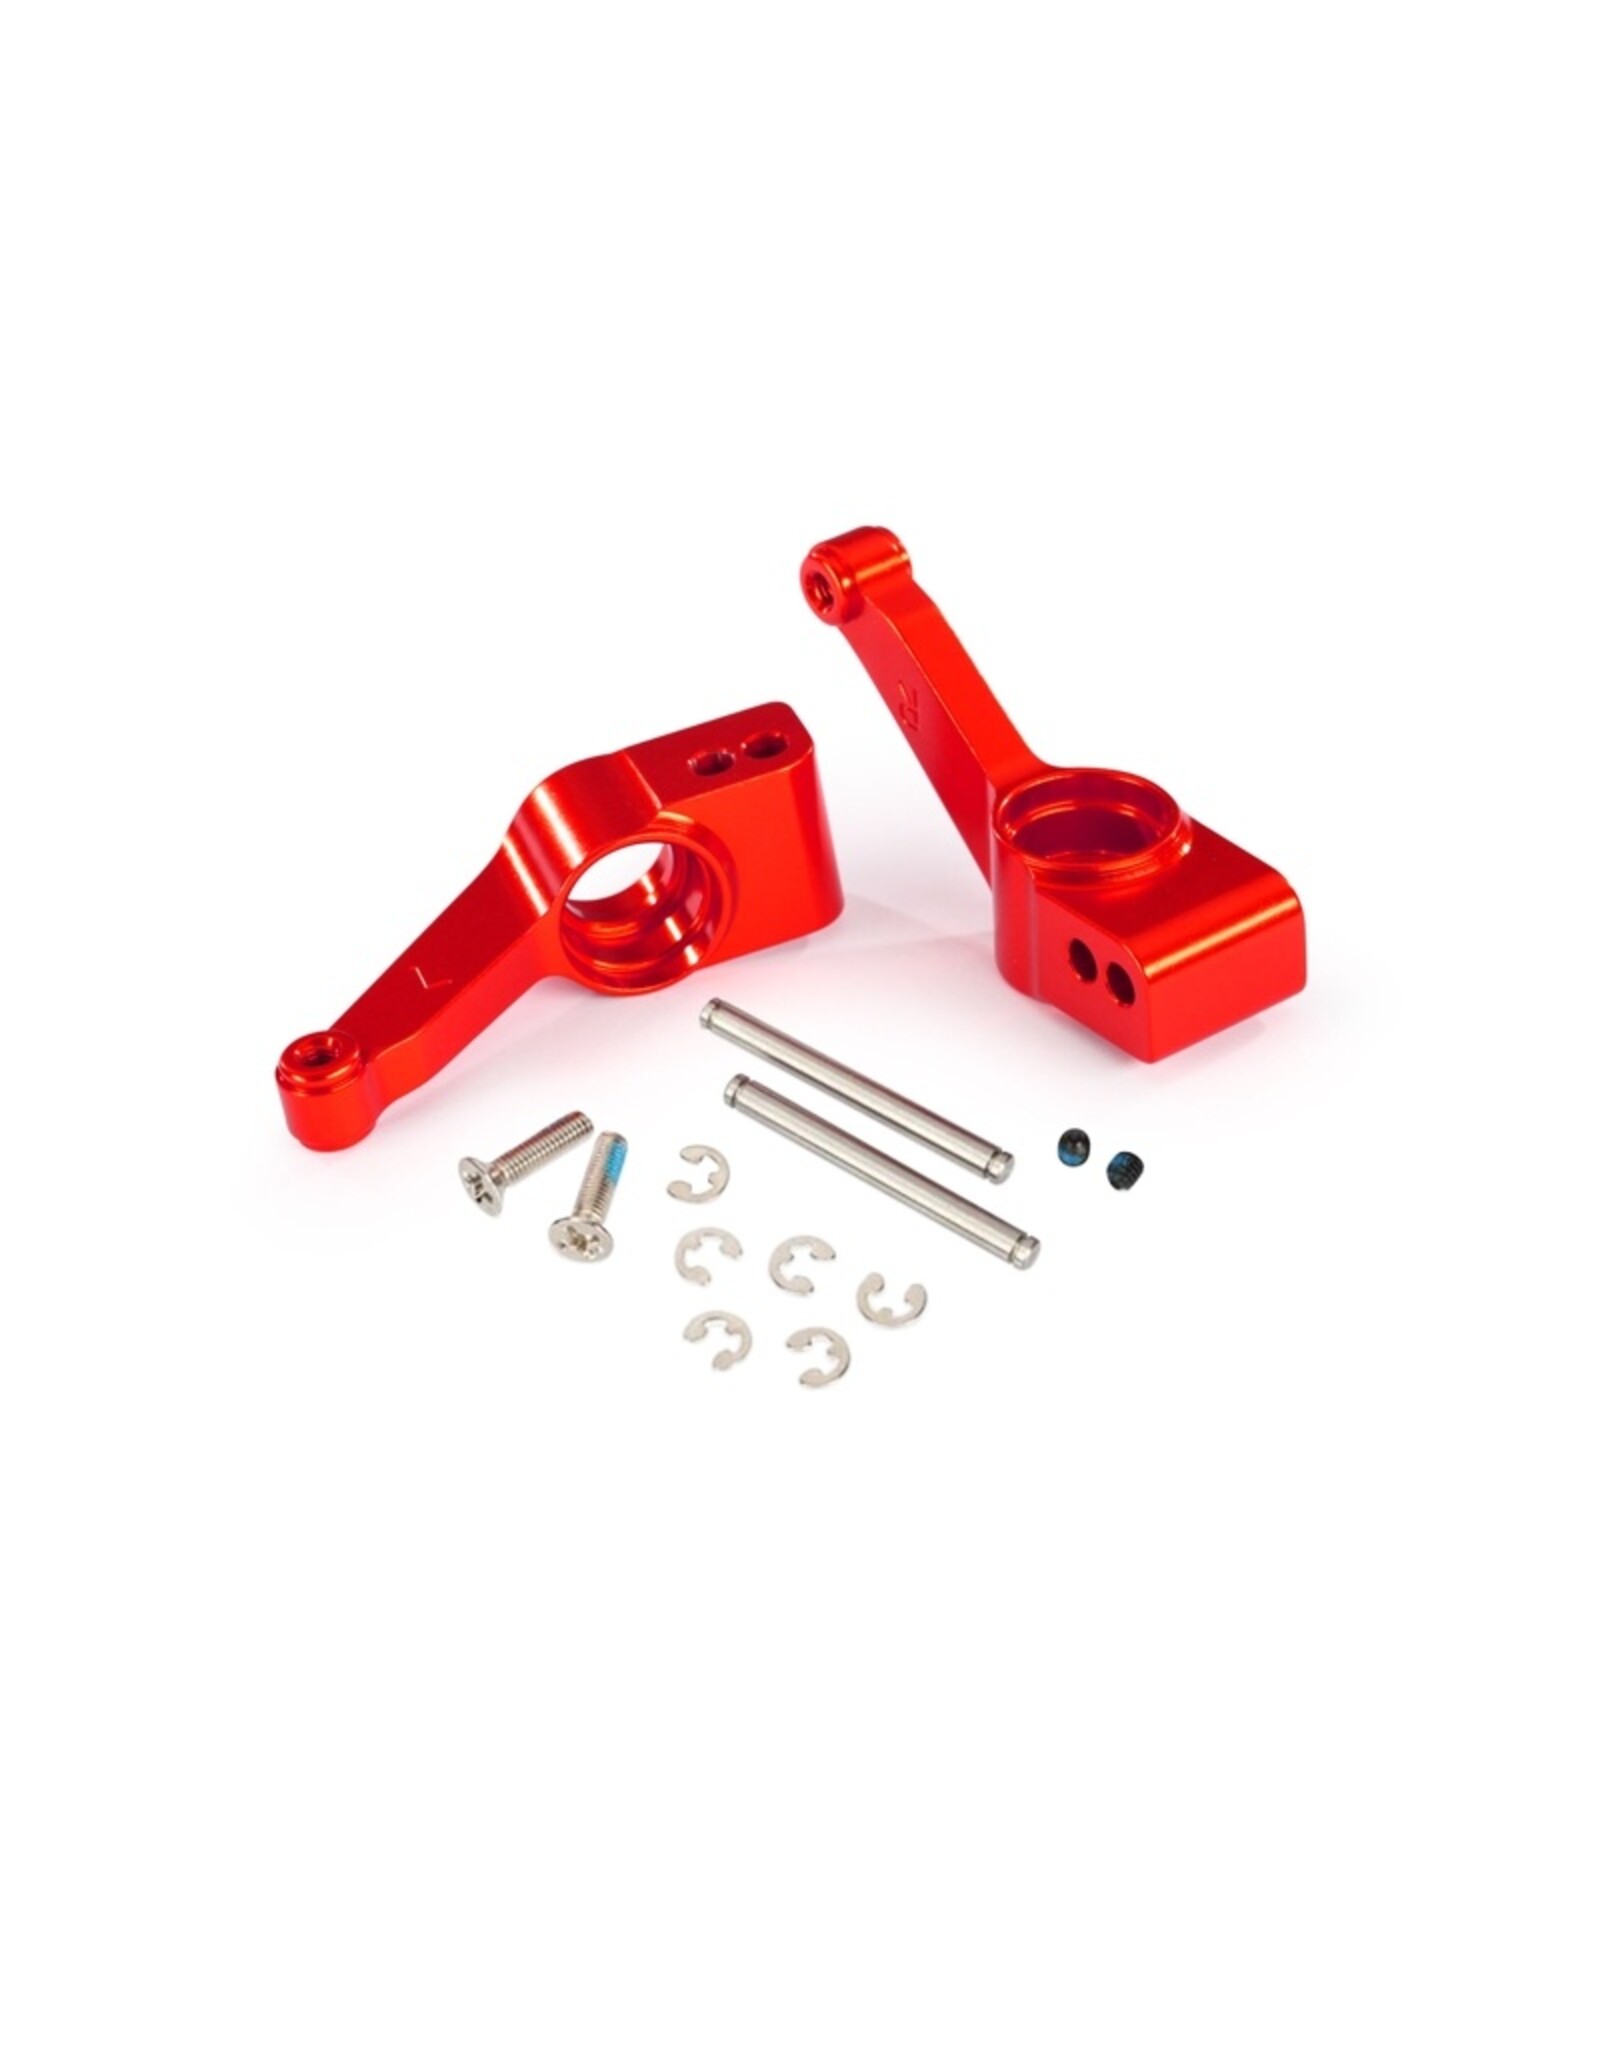 Traxxas TRA1952A Carriers Stub Axle Red Anodized Rear (2)